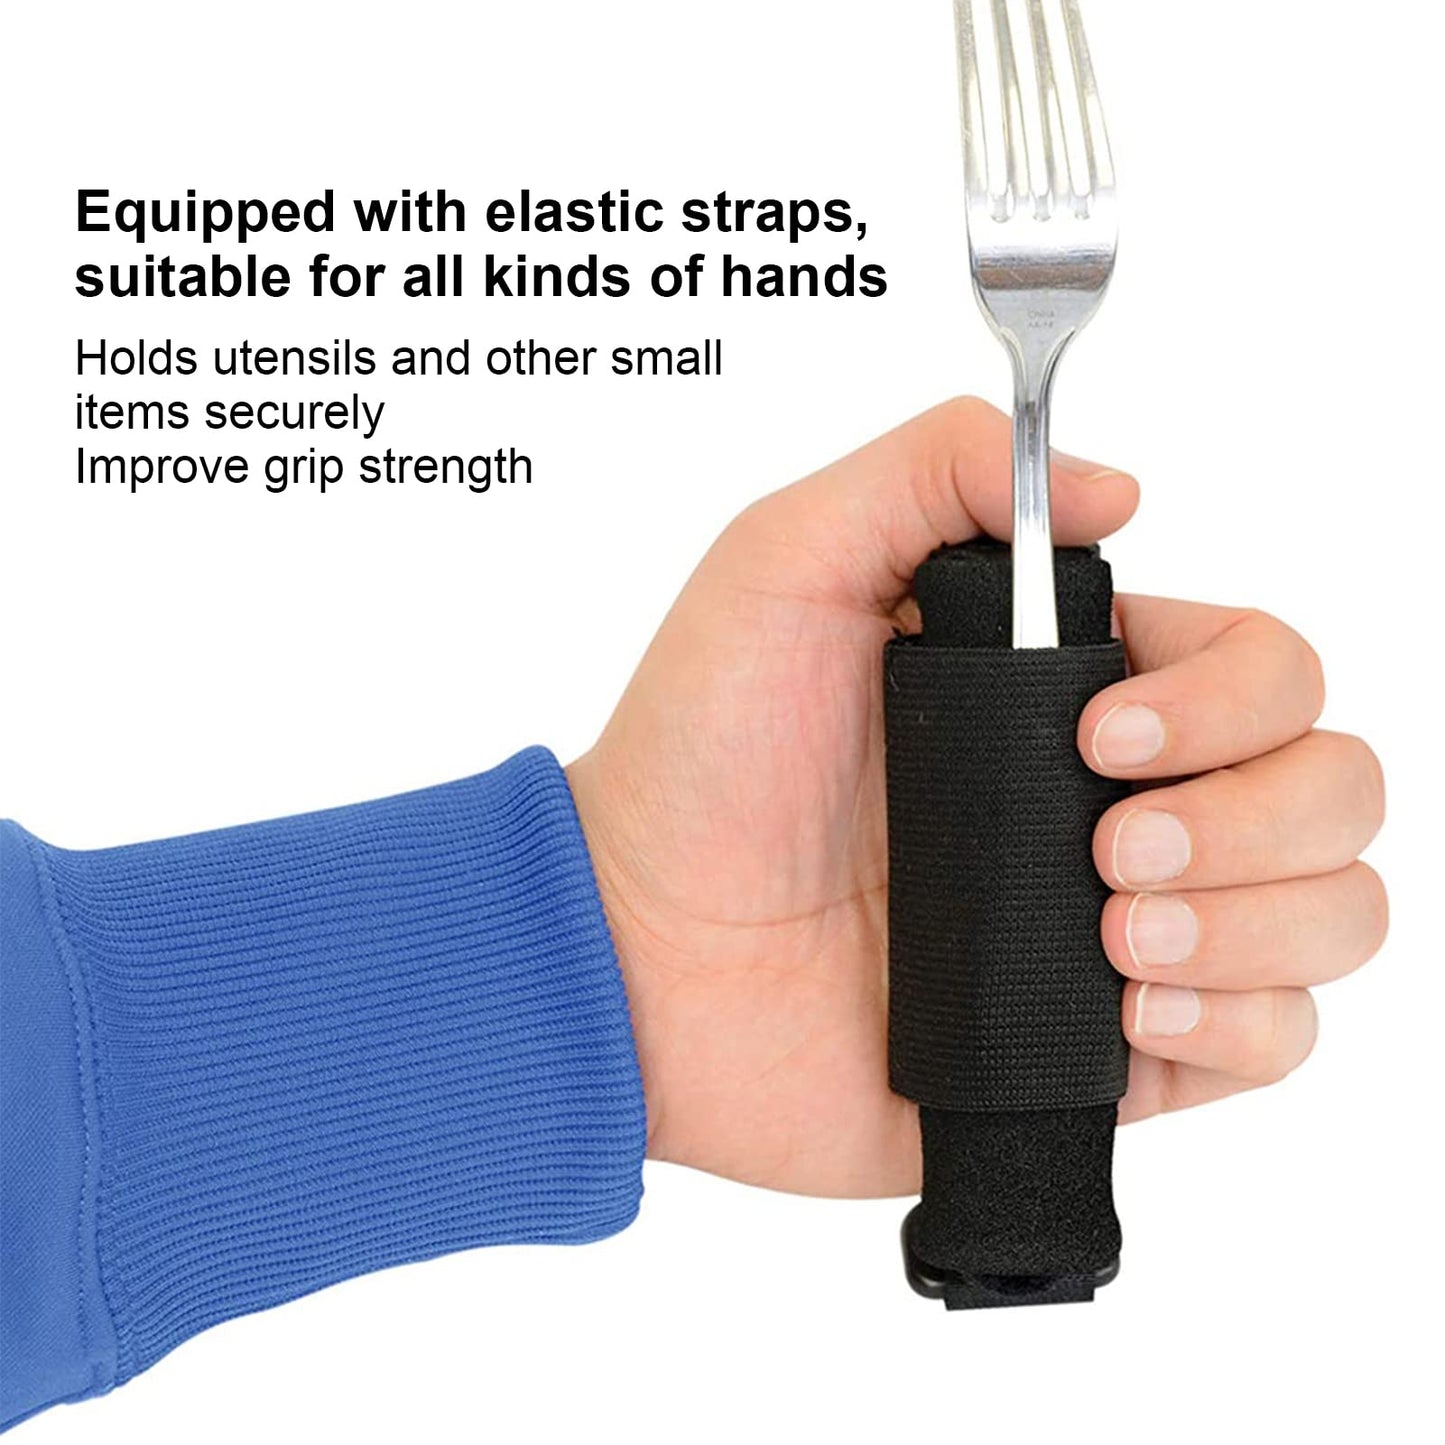 Disabled Eating Aids Utensil Holders Eating Assistance Hand Cuff for Holding Spoon, Fork, Cutlery Adjustable Nylon Gripping Strap for Limited Mobility, Weak Grip, Muscle Weakness, Elder, Handicapped